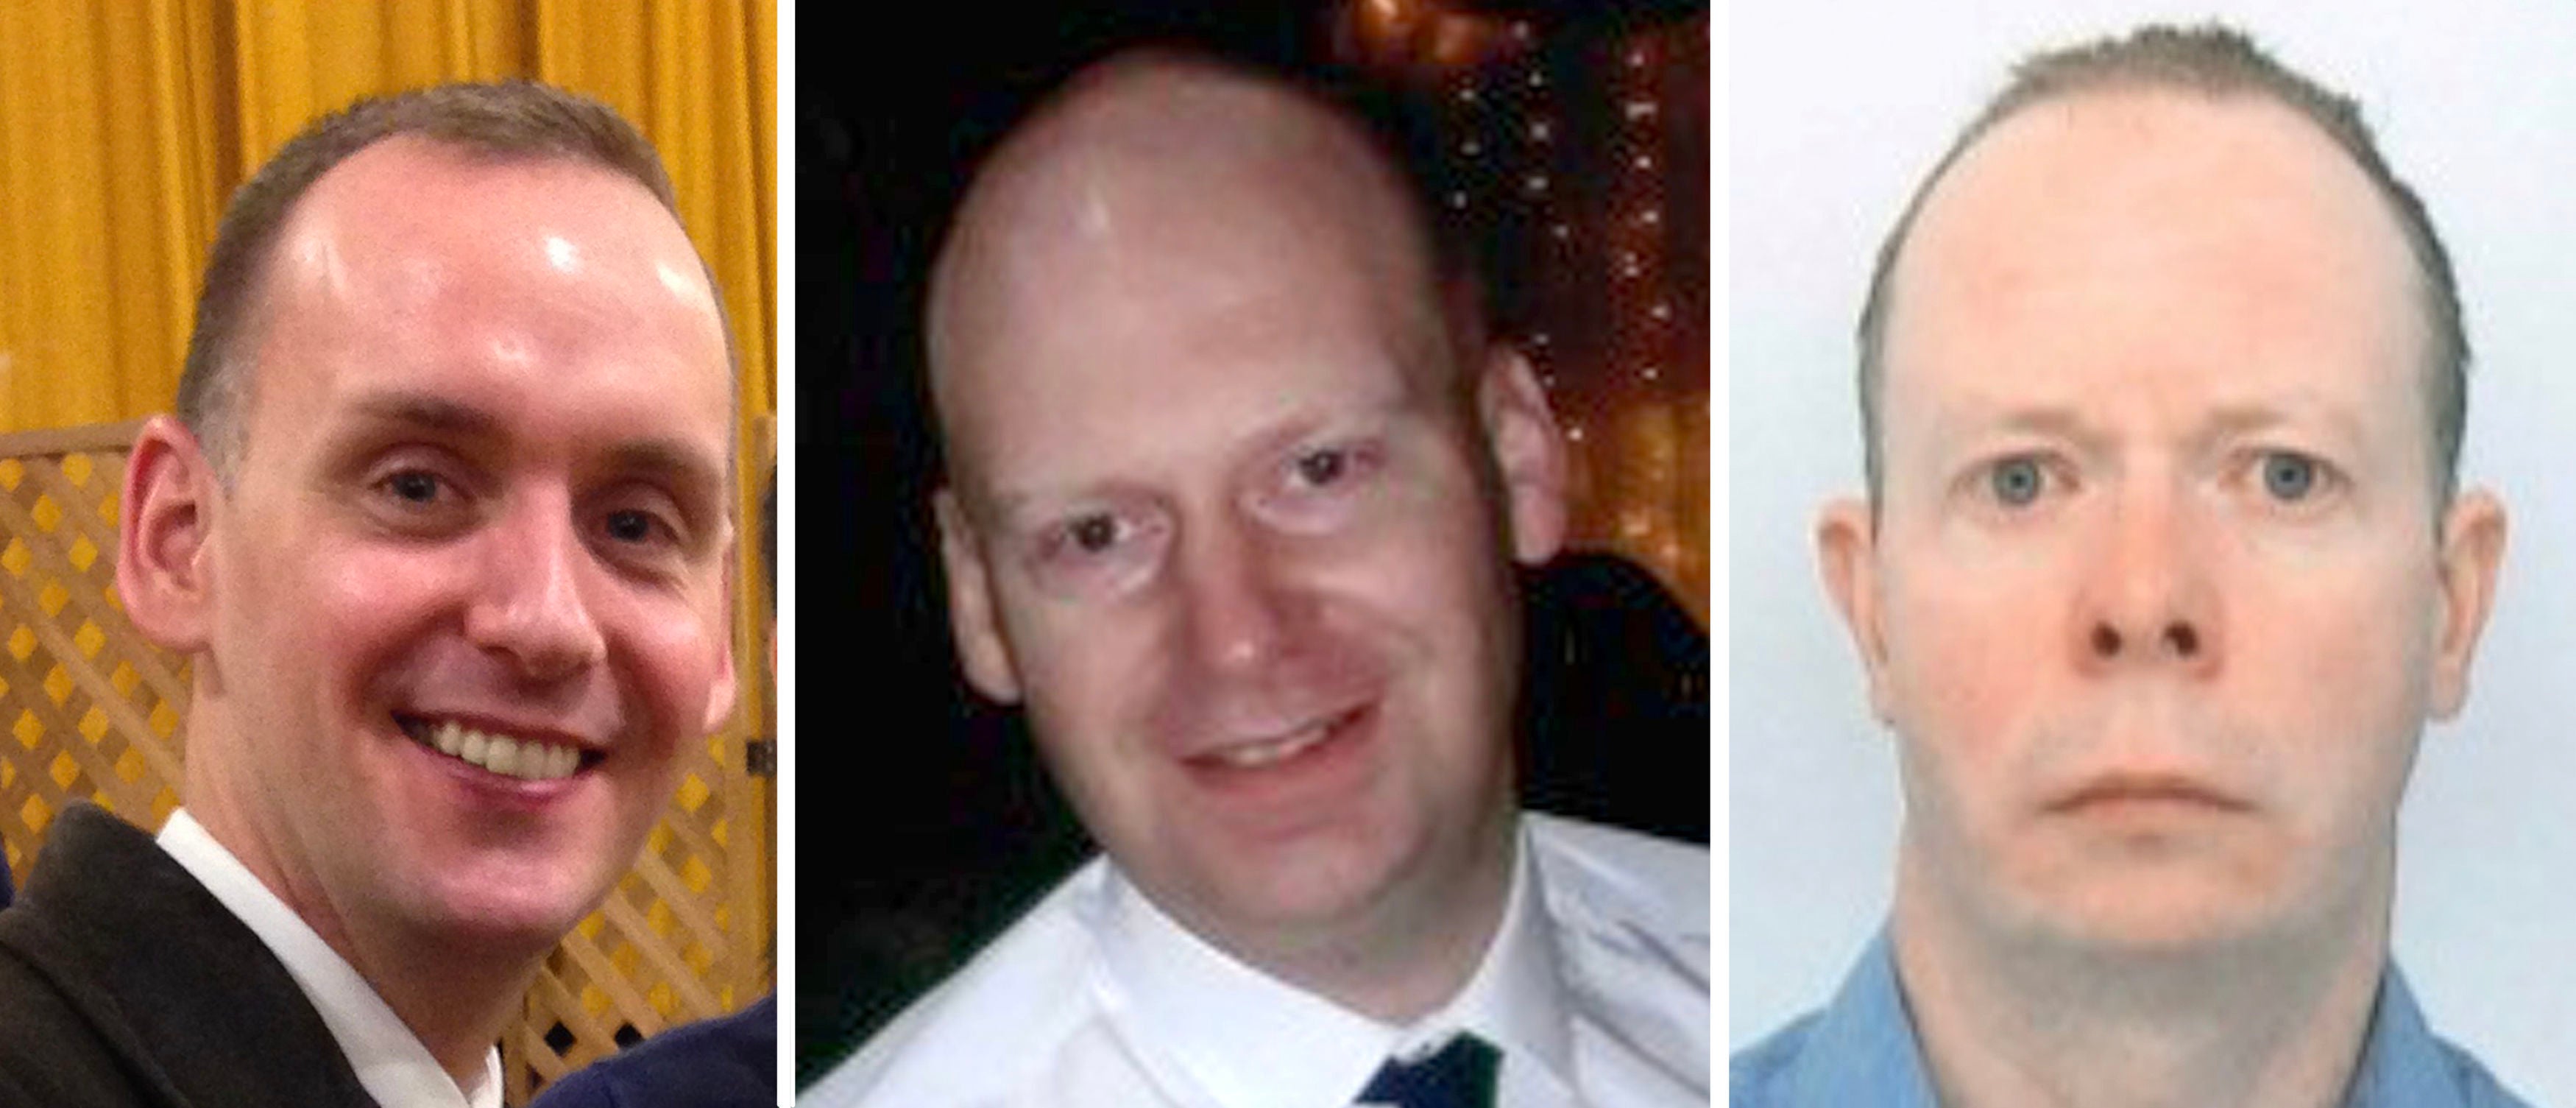 Joe Ritchie-Bennett, James Furlong and David Wails, the three victims of the Reading terror attack